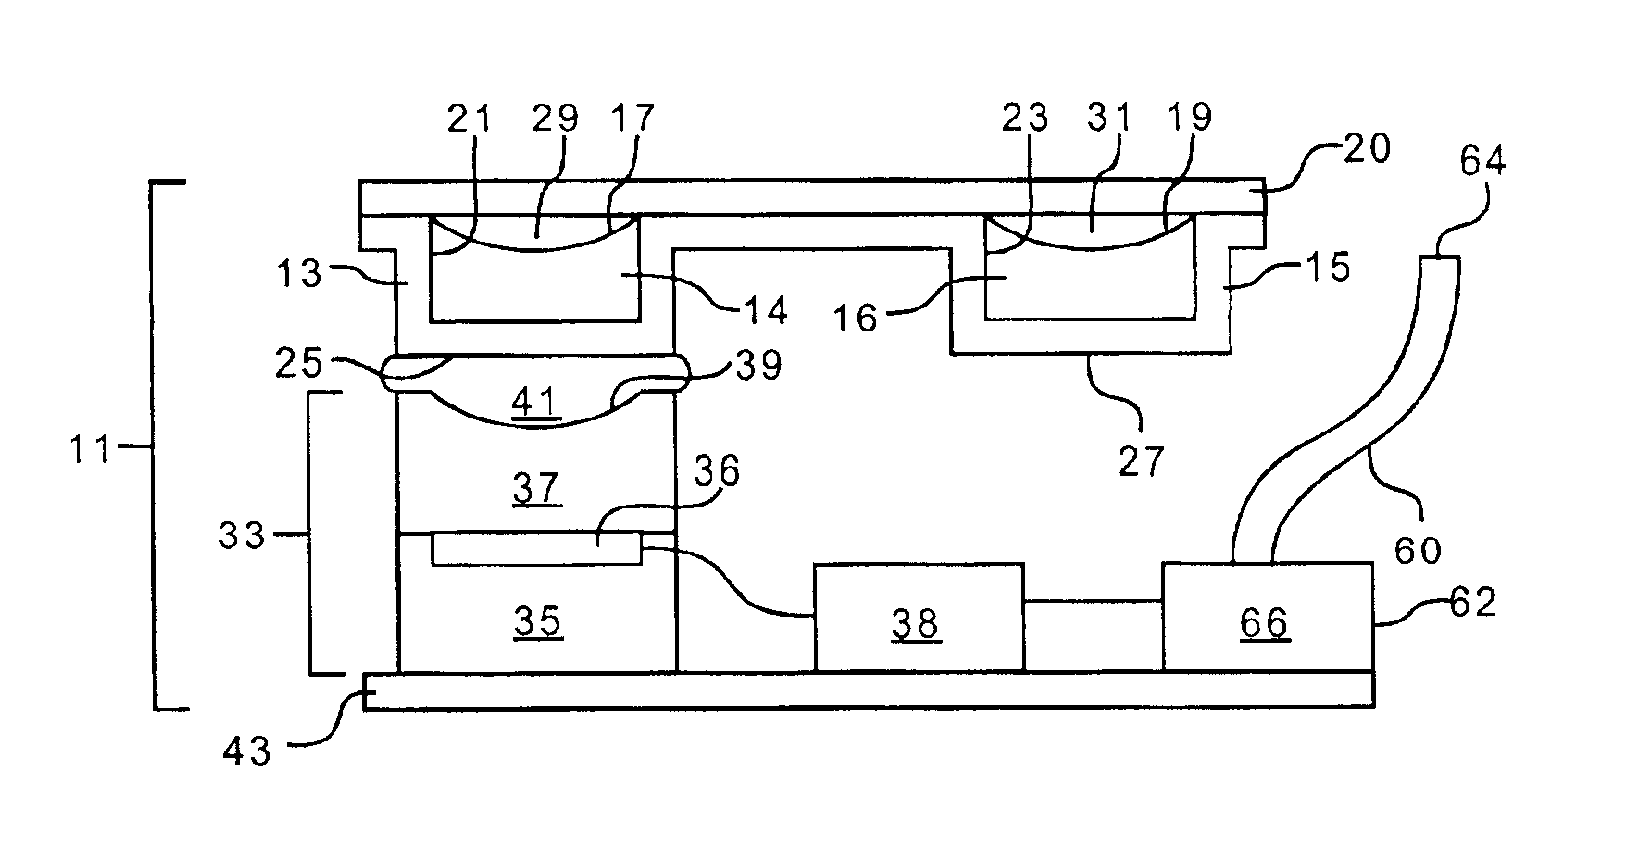 Acoustic control of the composition and/or volume of fluid in a reservoir